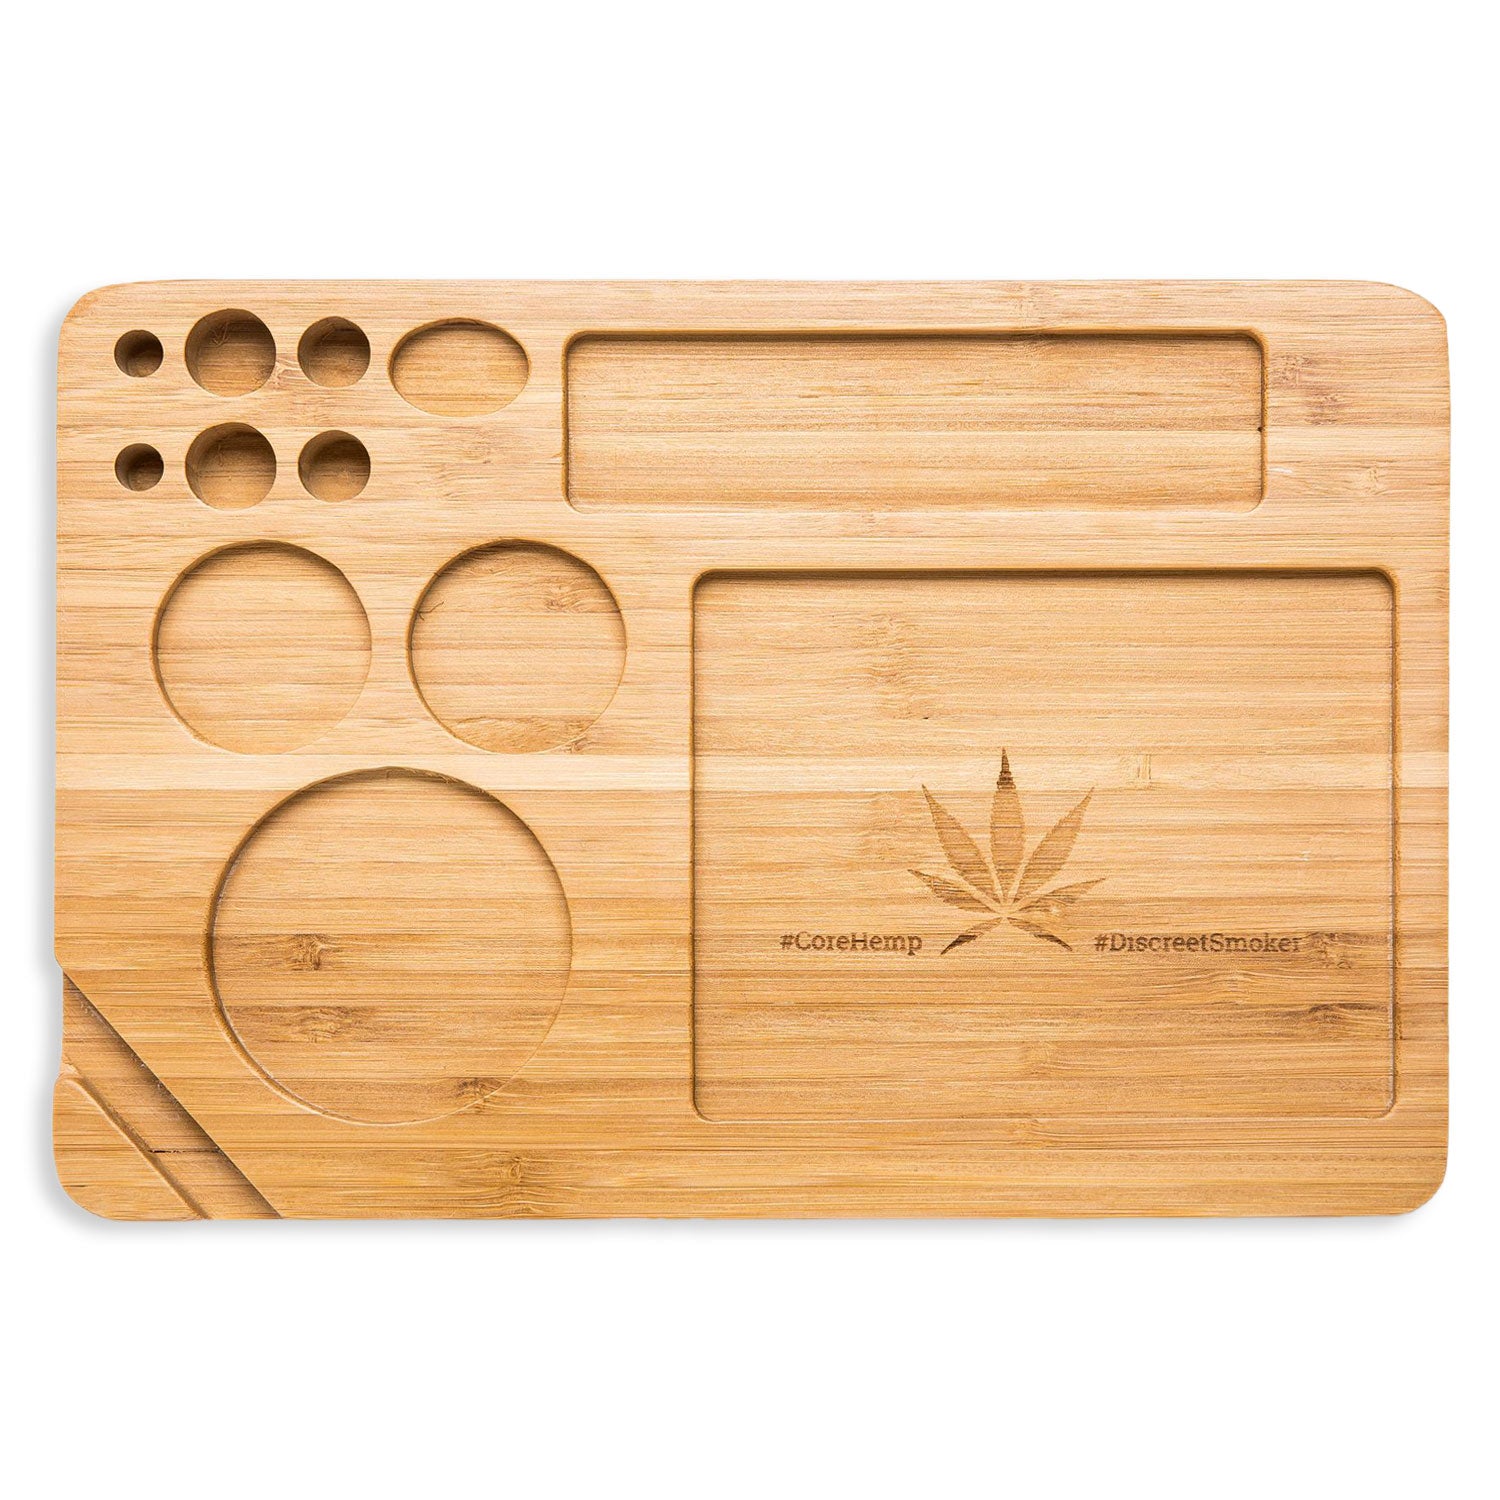 Bamboo Rolling Tray Front View, bamboo rolling tray, natural bamboo tray, raw bamboo rolling tray, raw rolling tray wood, bamboo tray, inexpensive rolling tray, rolling tray for sale, unique rolling trays, blunt rolling tray, blunt tray, cool rolling tray, small rolling tray, weed rolling tray